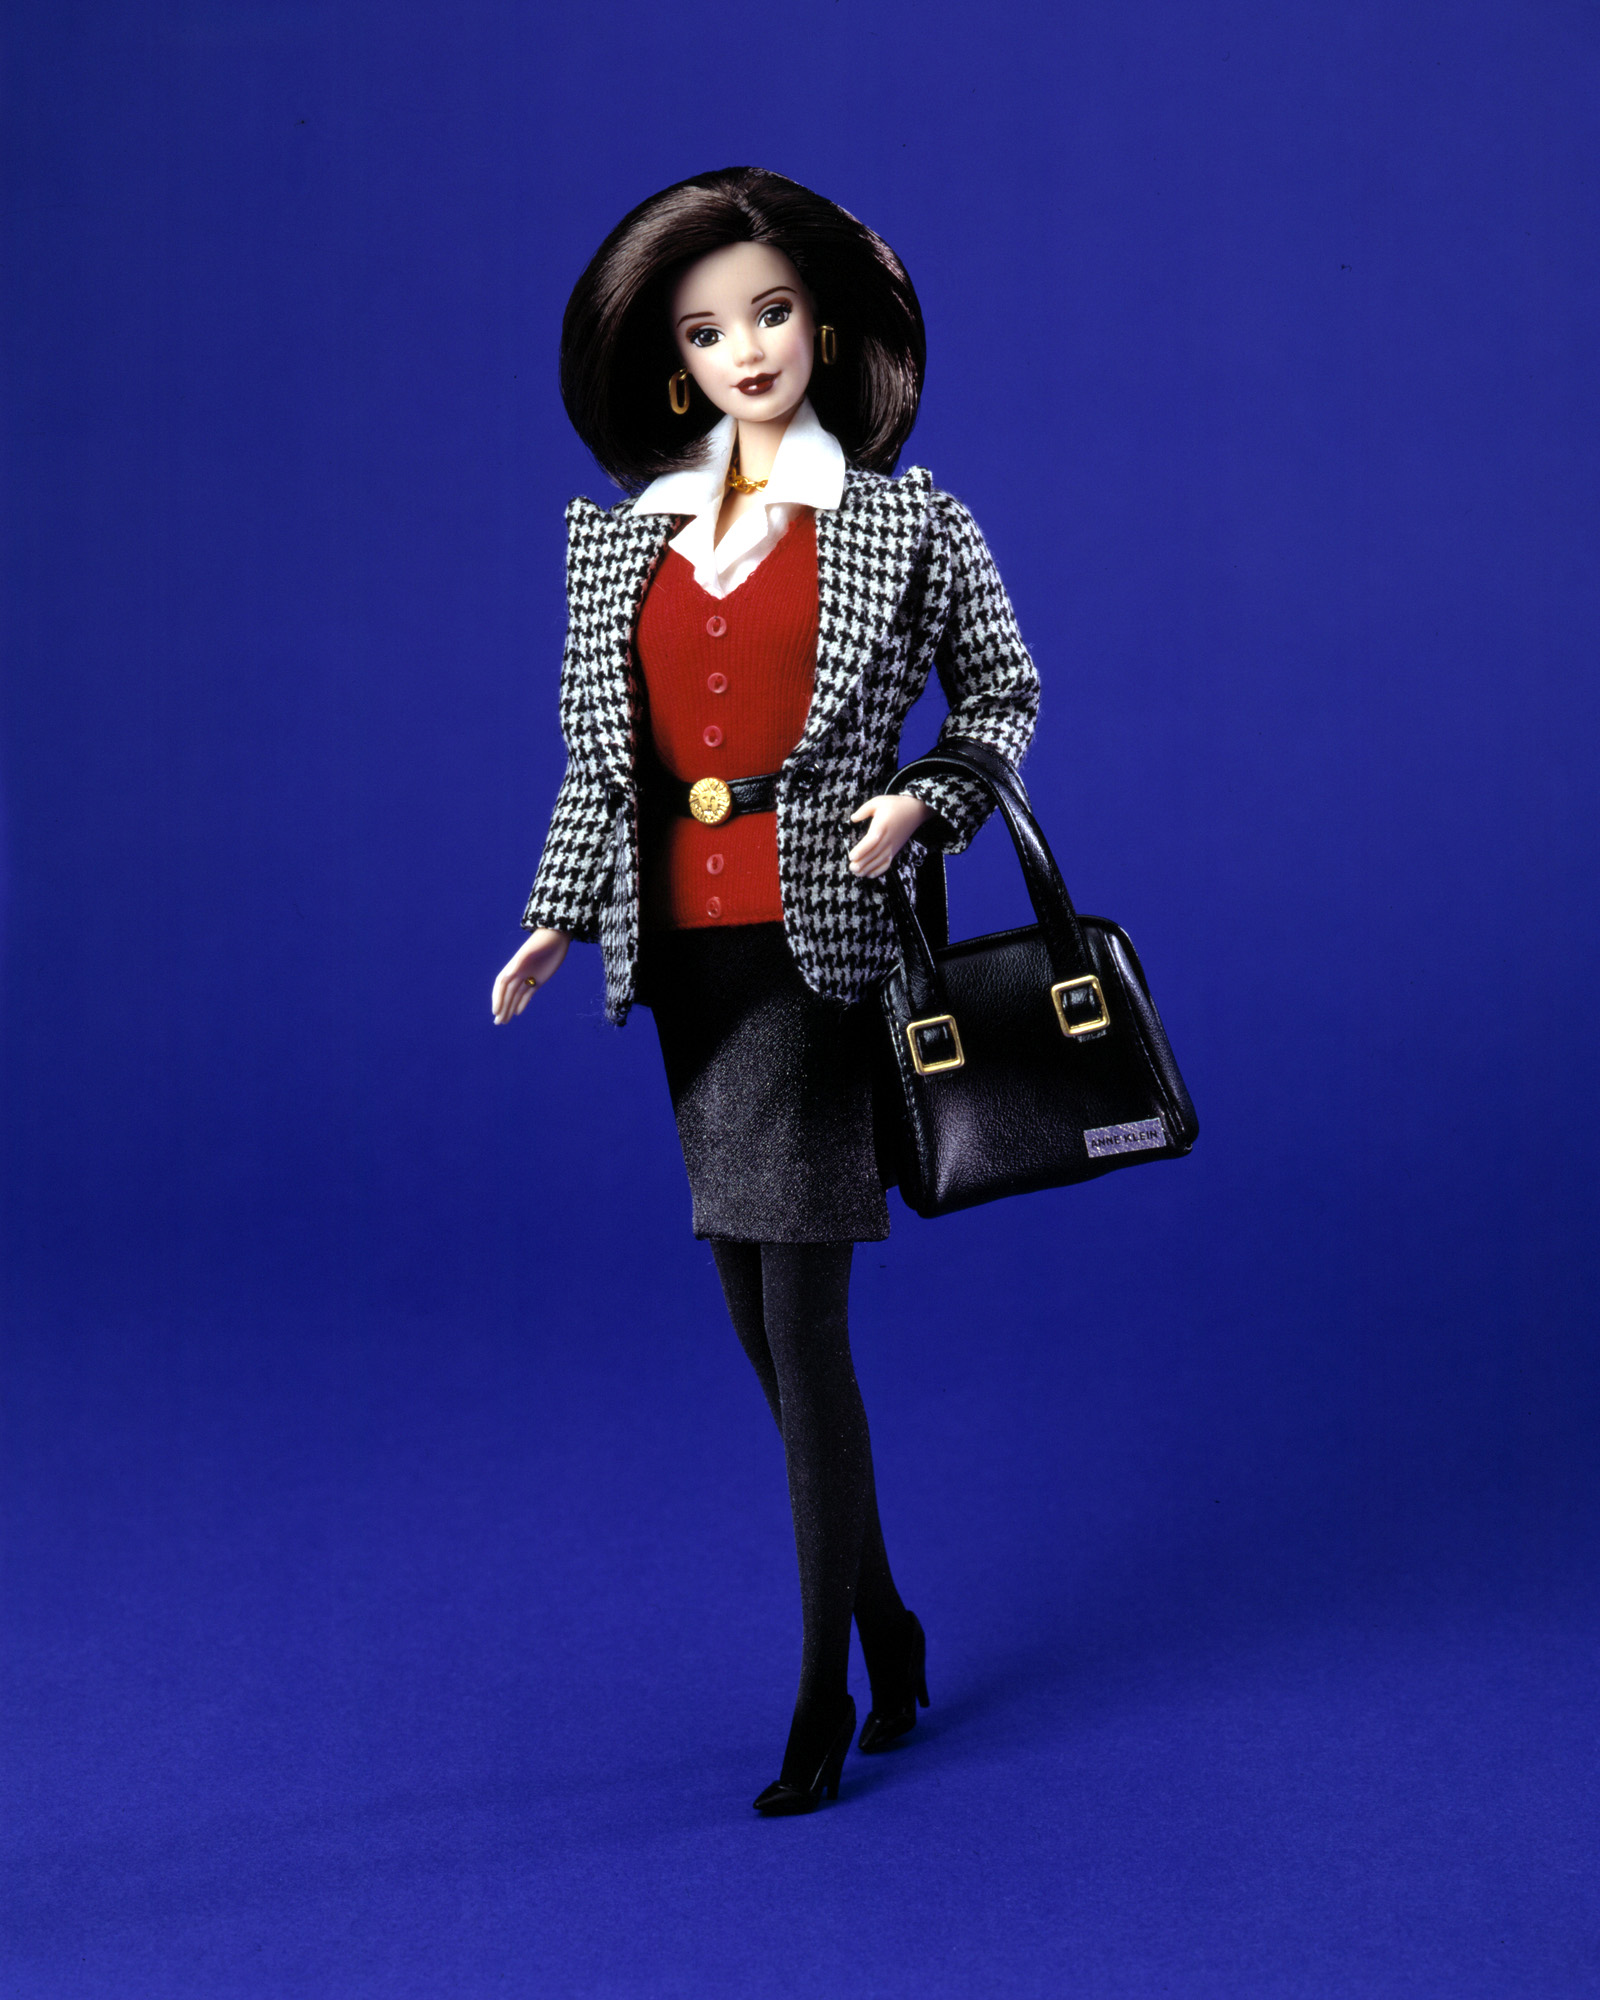 The Anne Klein Barbie Doll released in 1997.